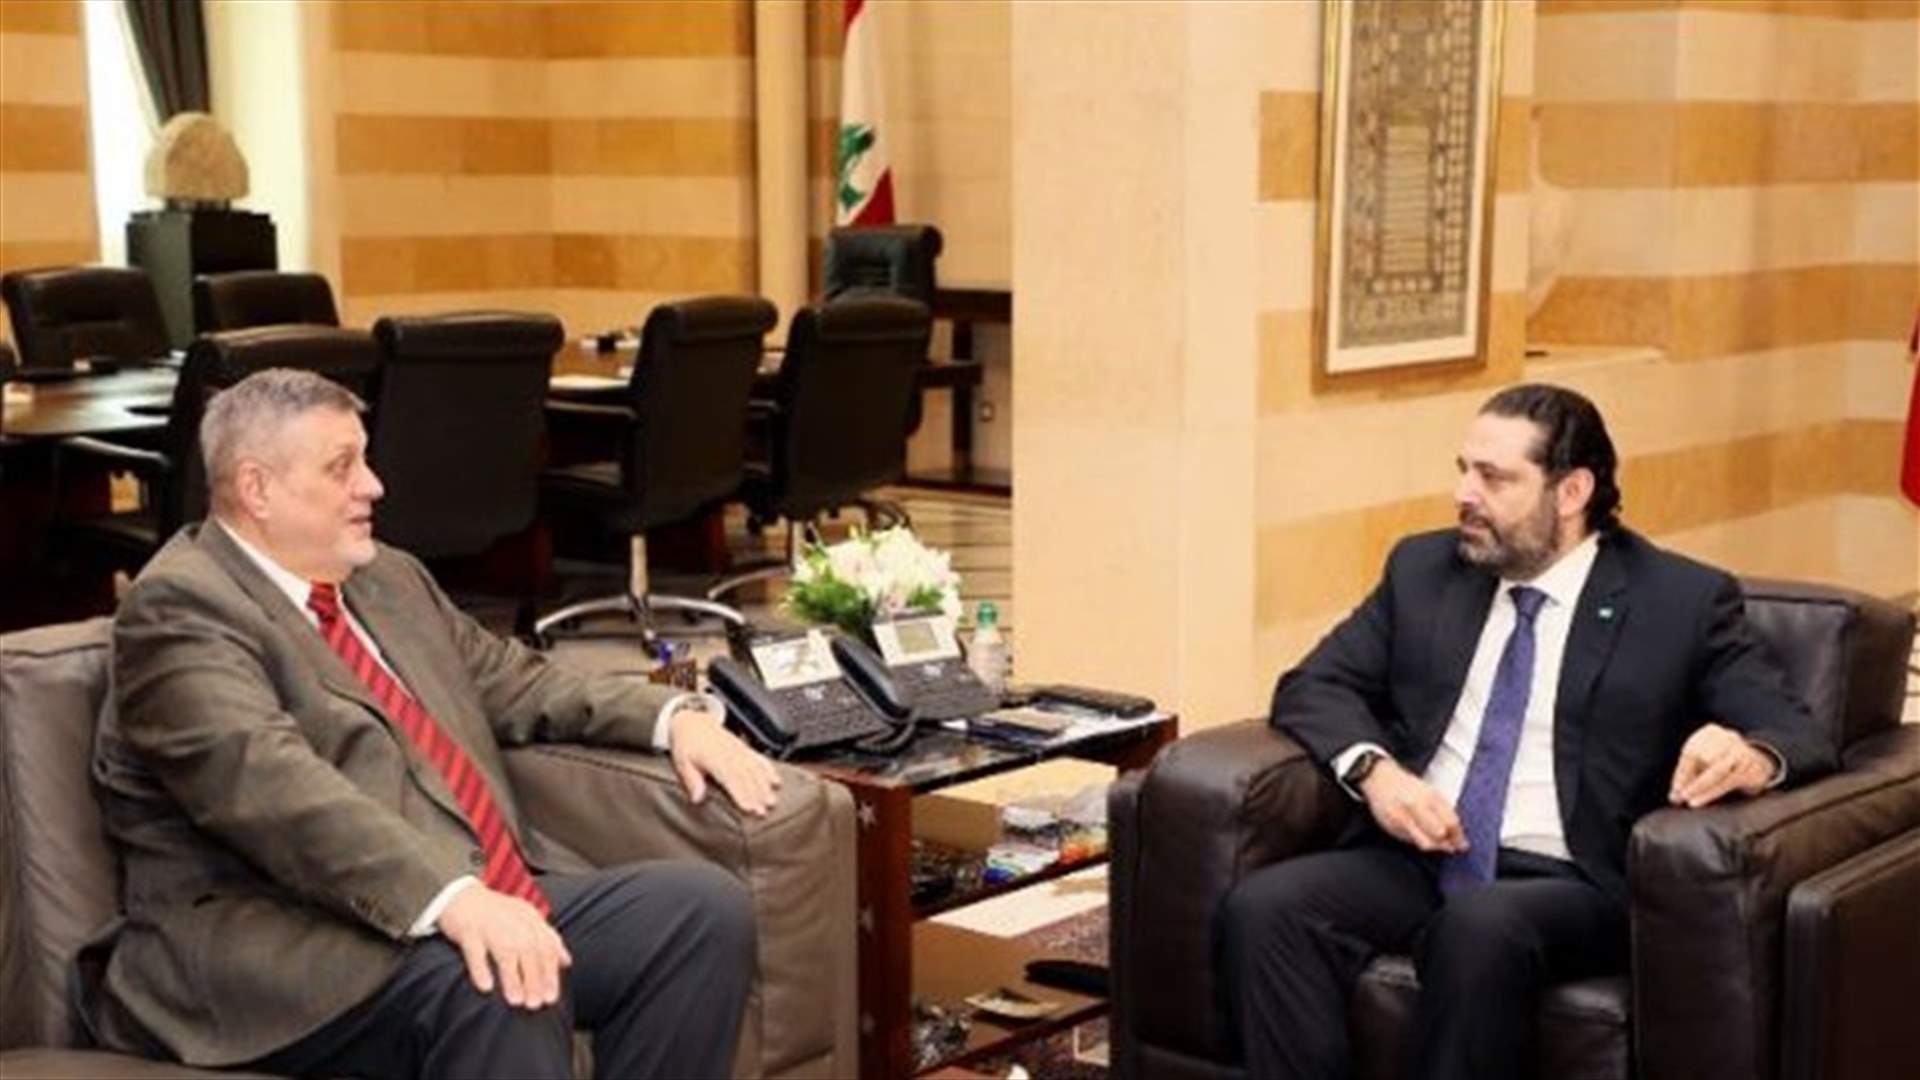 UN Special Coordinator for Lebanon meets with PM Hariri